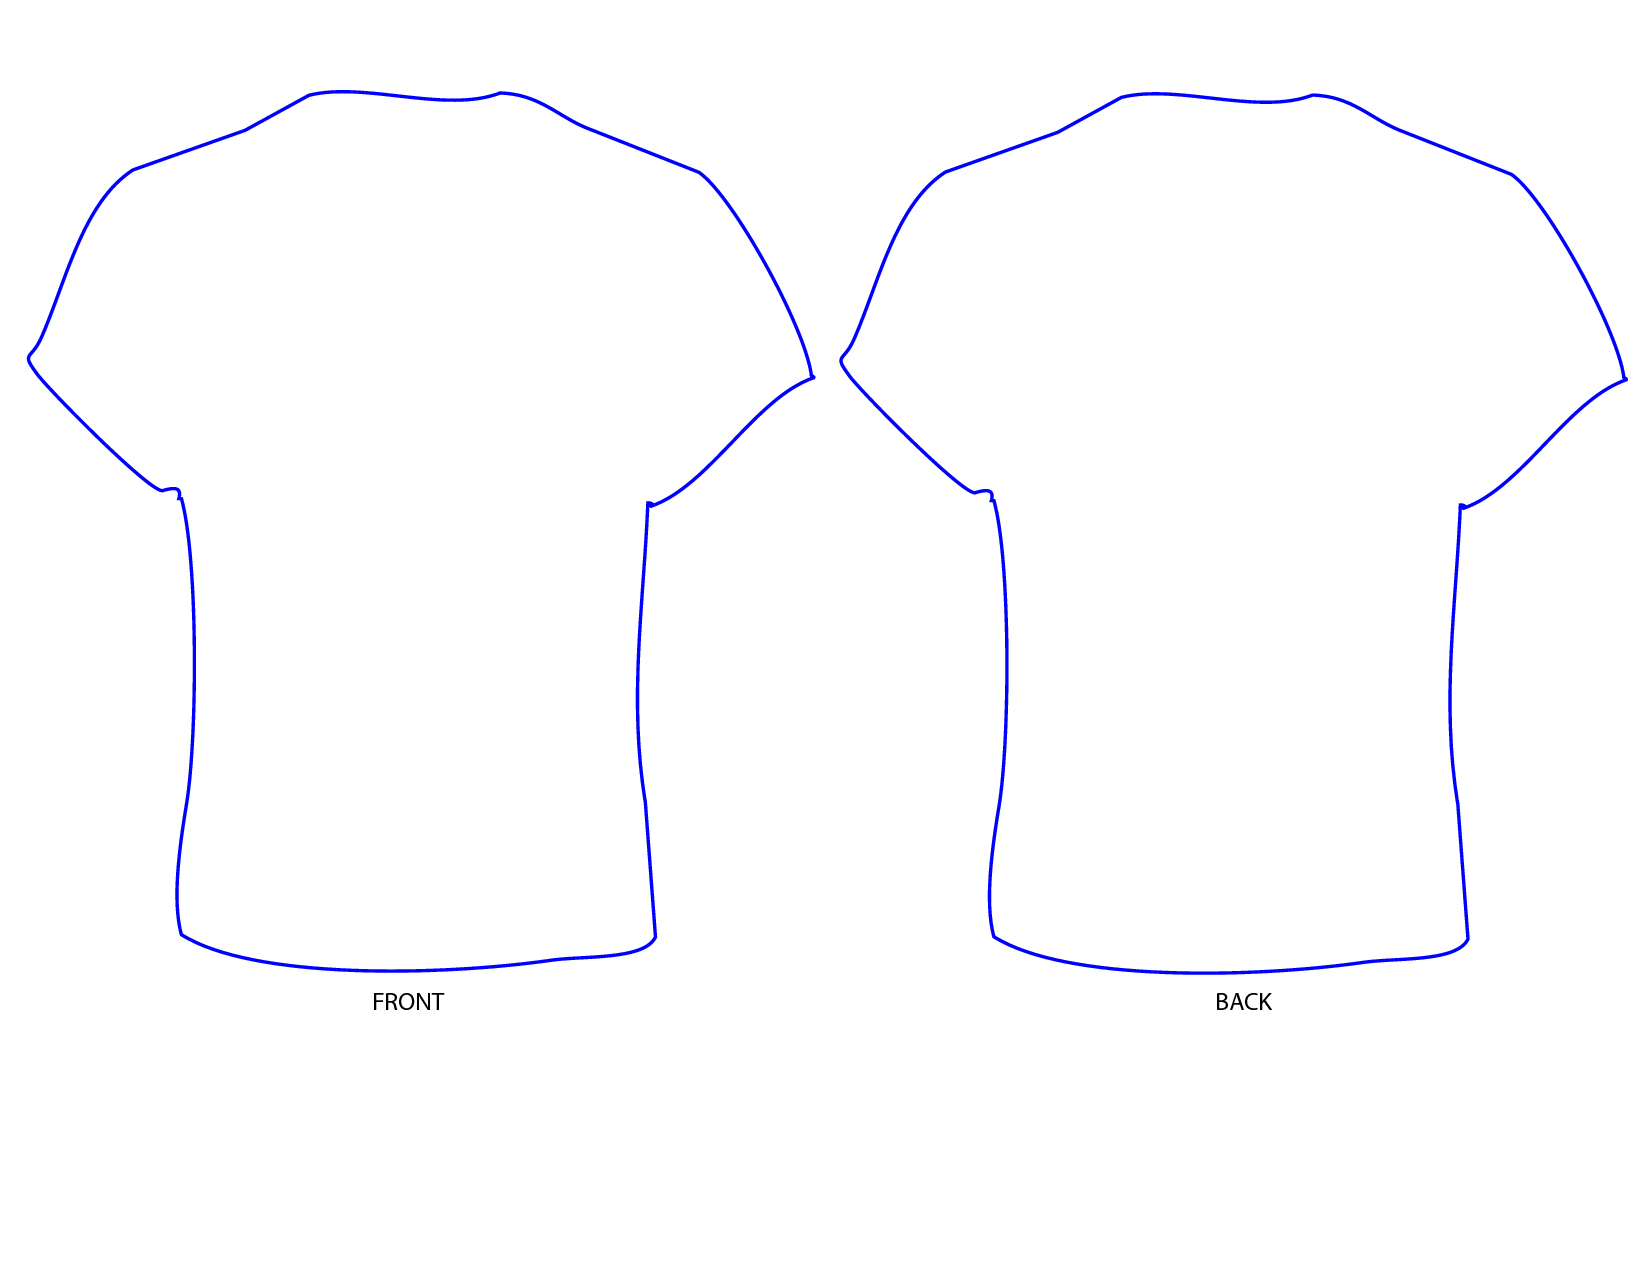 Free T Shirt Template Printable, Download Free Clip Art Intended For Blank Tshirt Template Printable